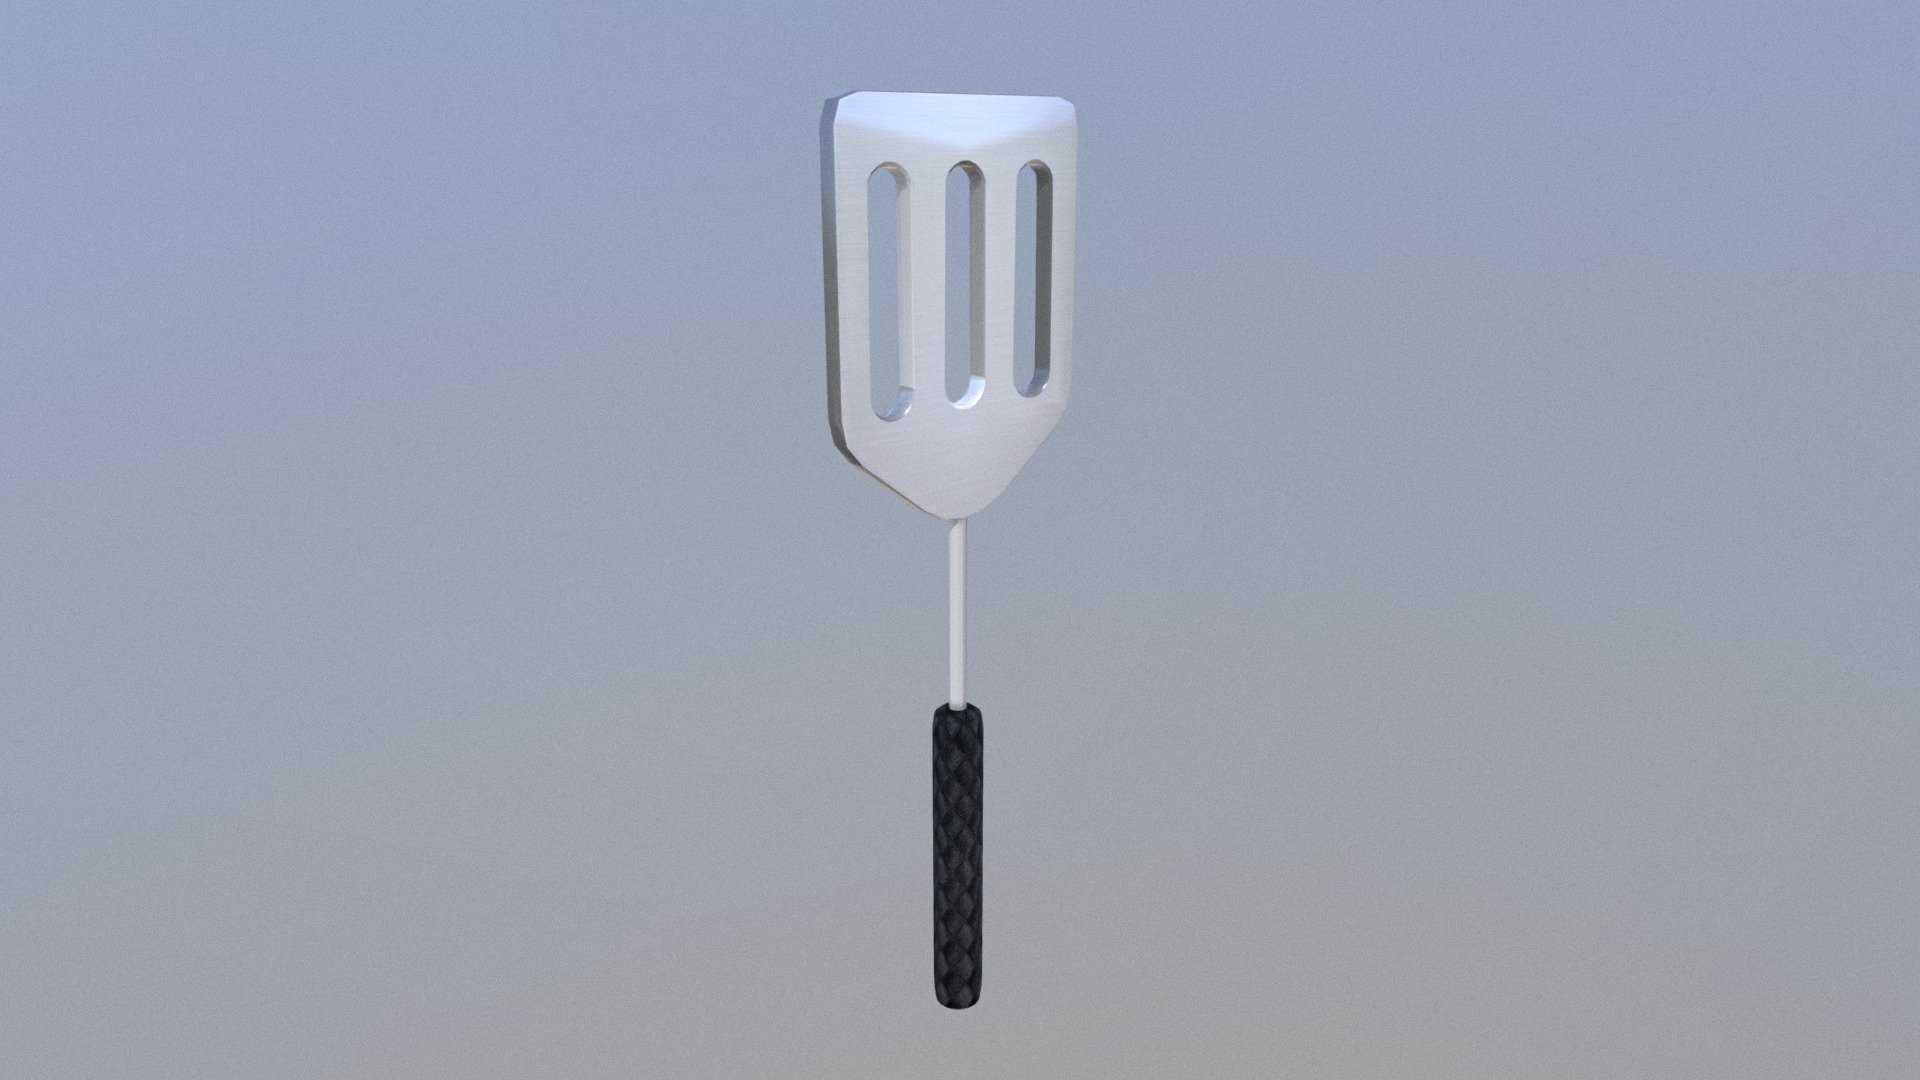 Spatulas are a kitchen tool designed to cook a certain range of foods, as shown throughout the SpongeBob SquarePants series. They first appear in the episode &ldquo;Help Wanted.